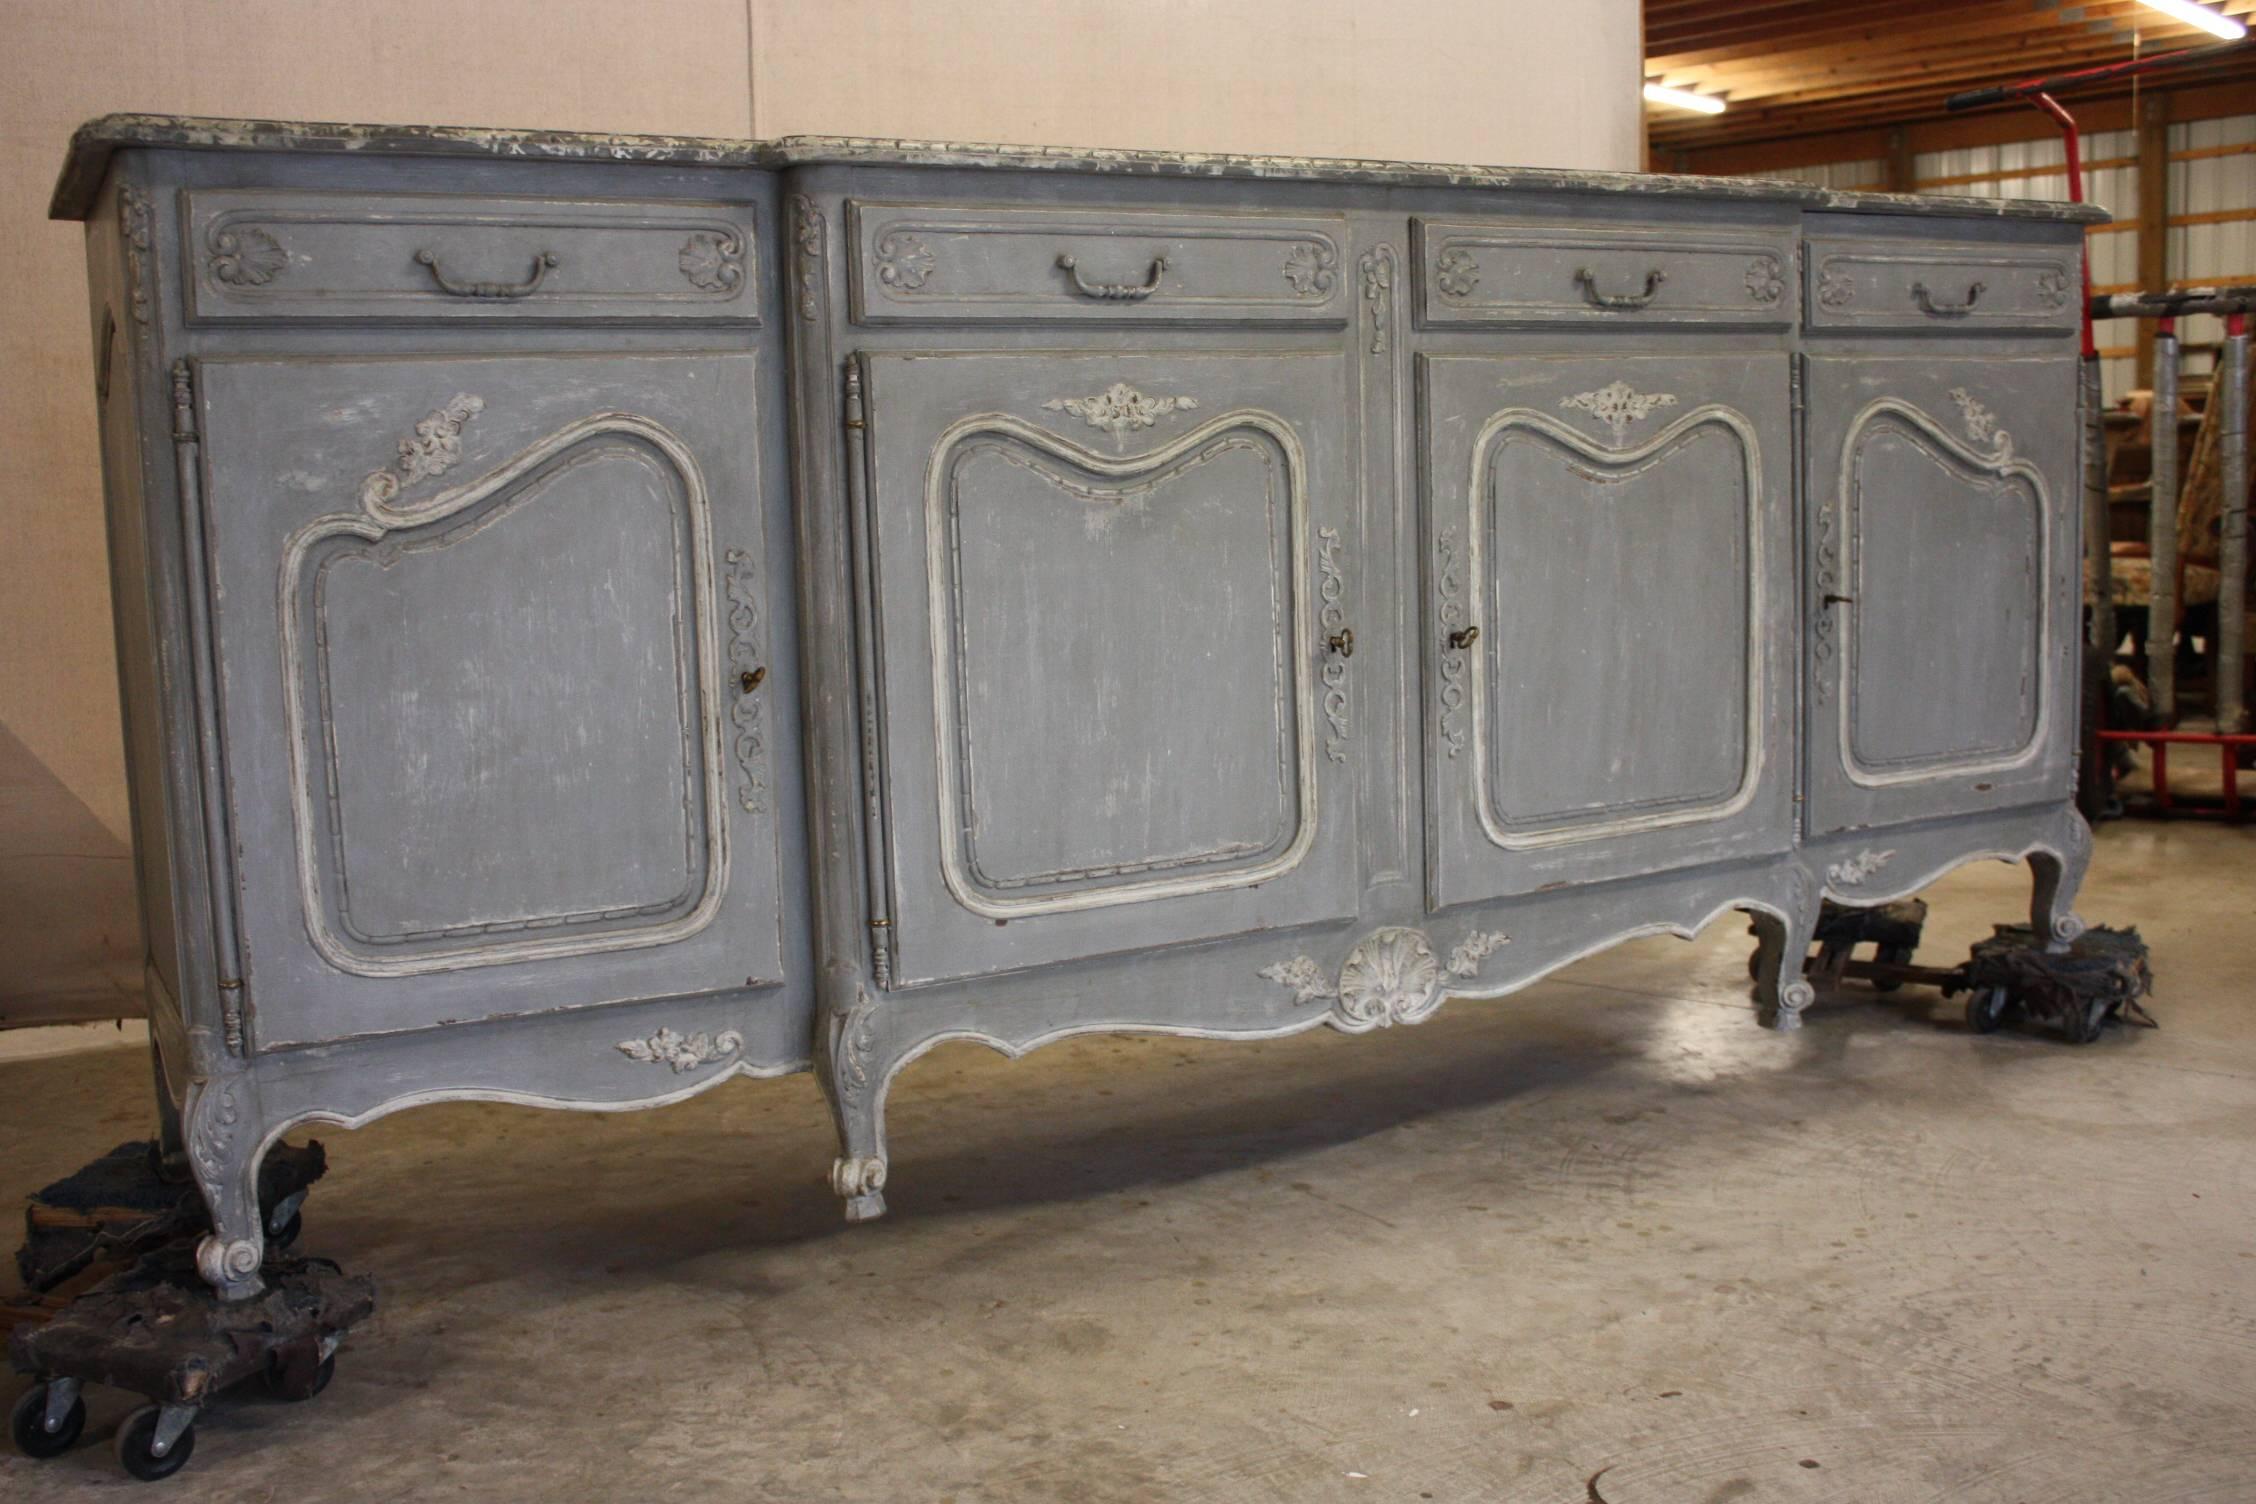 Painted French enfilade with faux marble top. Enfilade has four doors and four drawers with original hardware. Hand carvings on the doors, drawers and on the bottom of the enfilade. It is painted a pale blue and white undertones while the faux